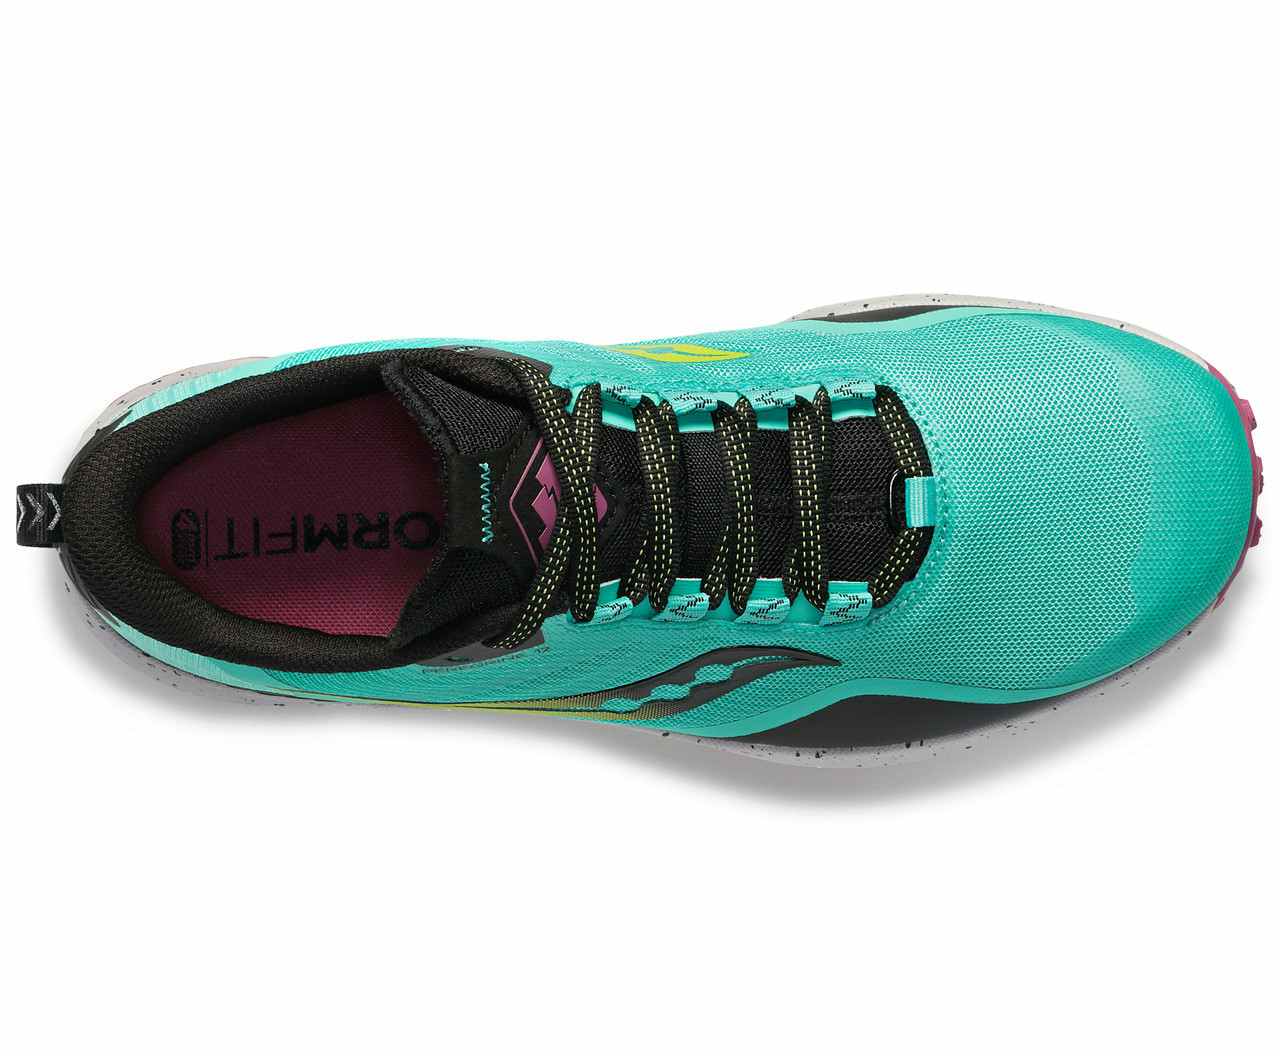 Peregrine 12 Trail Running Shoes Coolmint/Acid